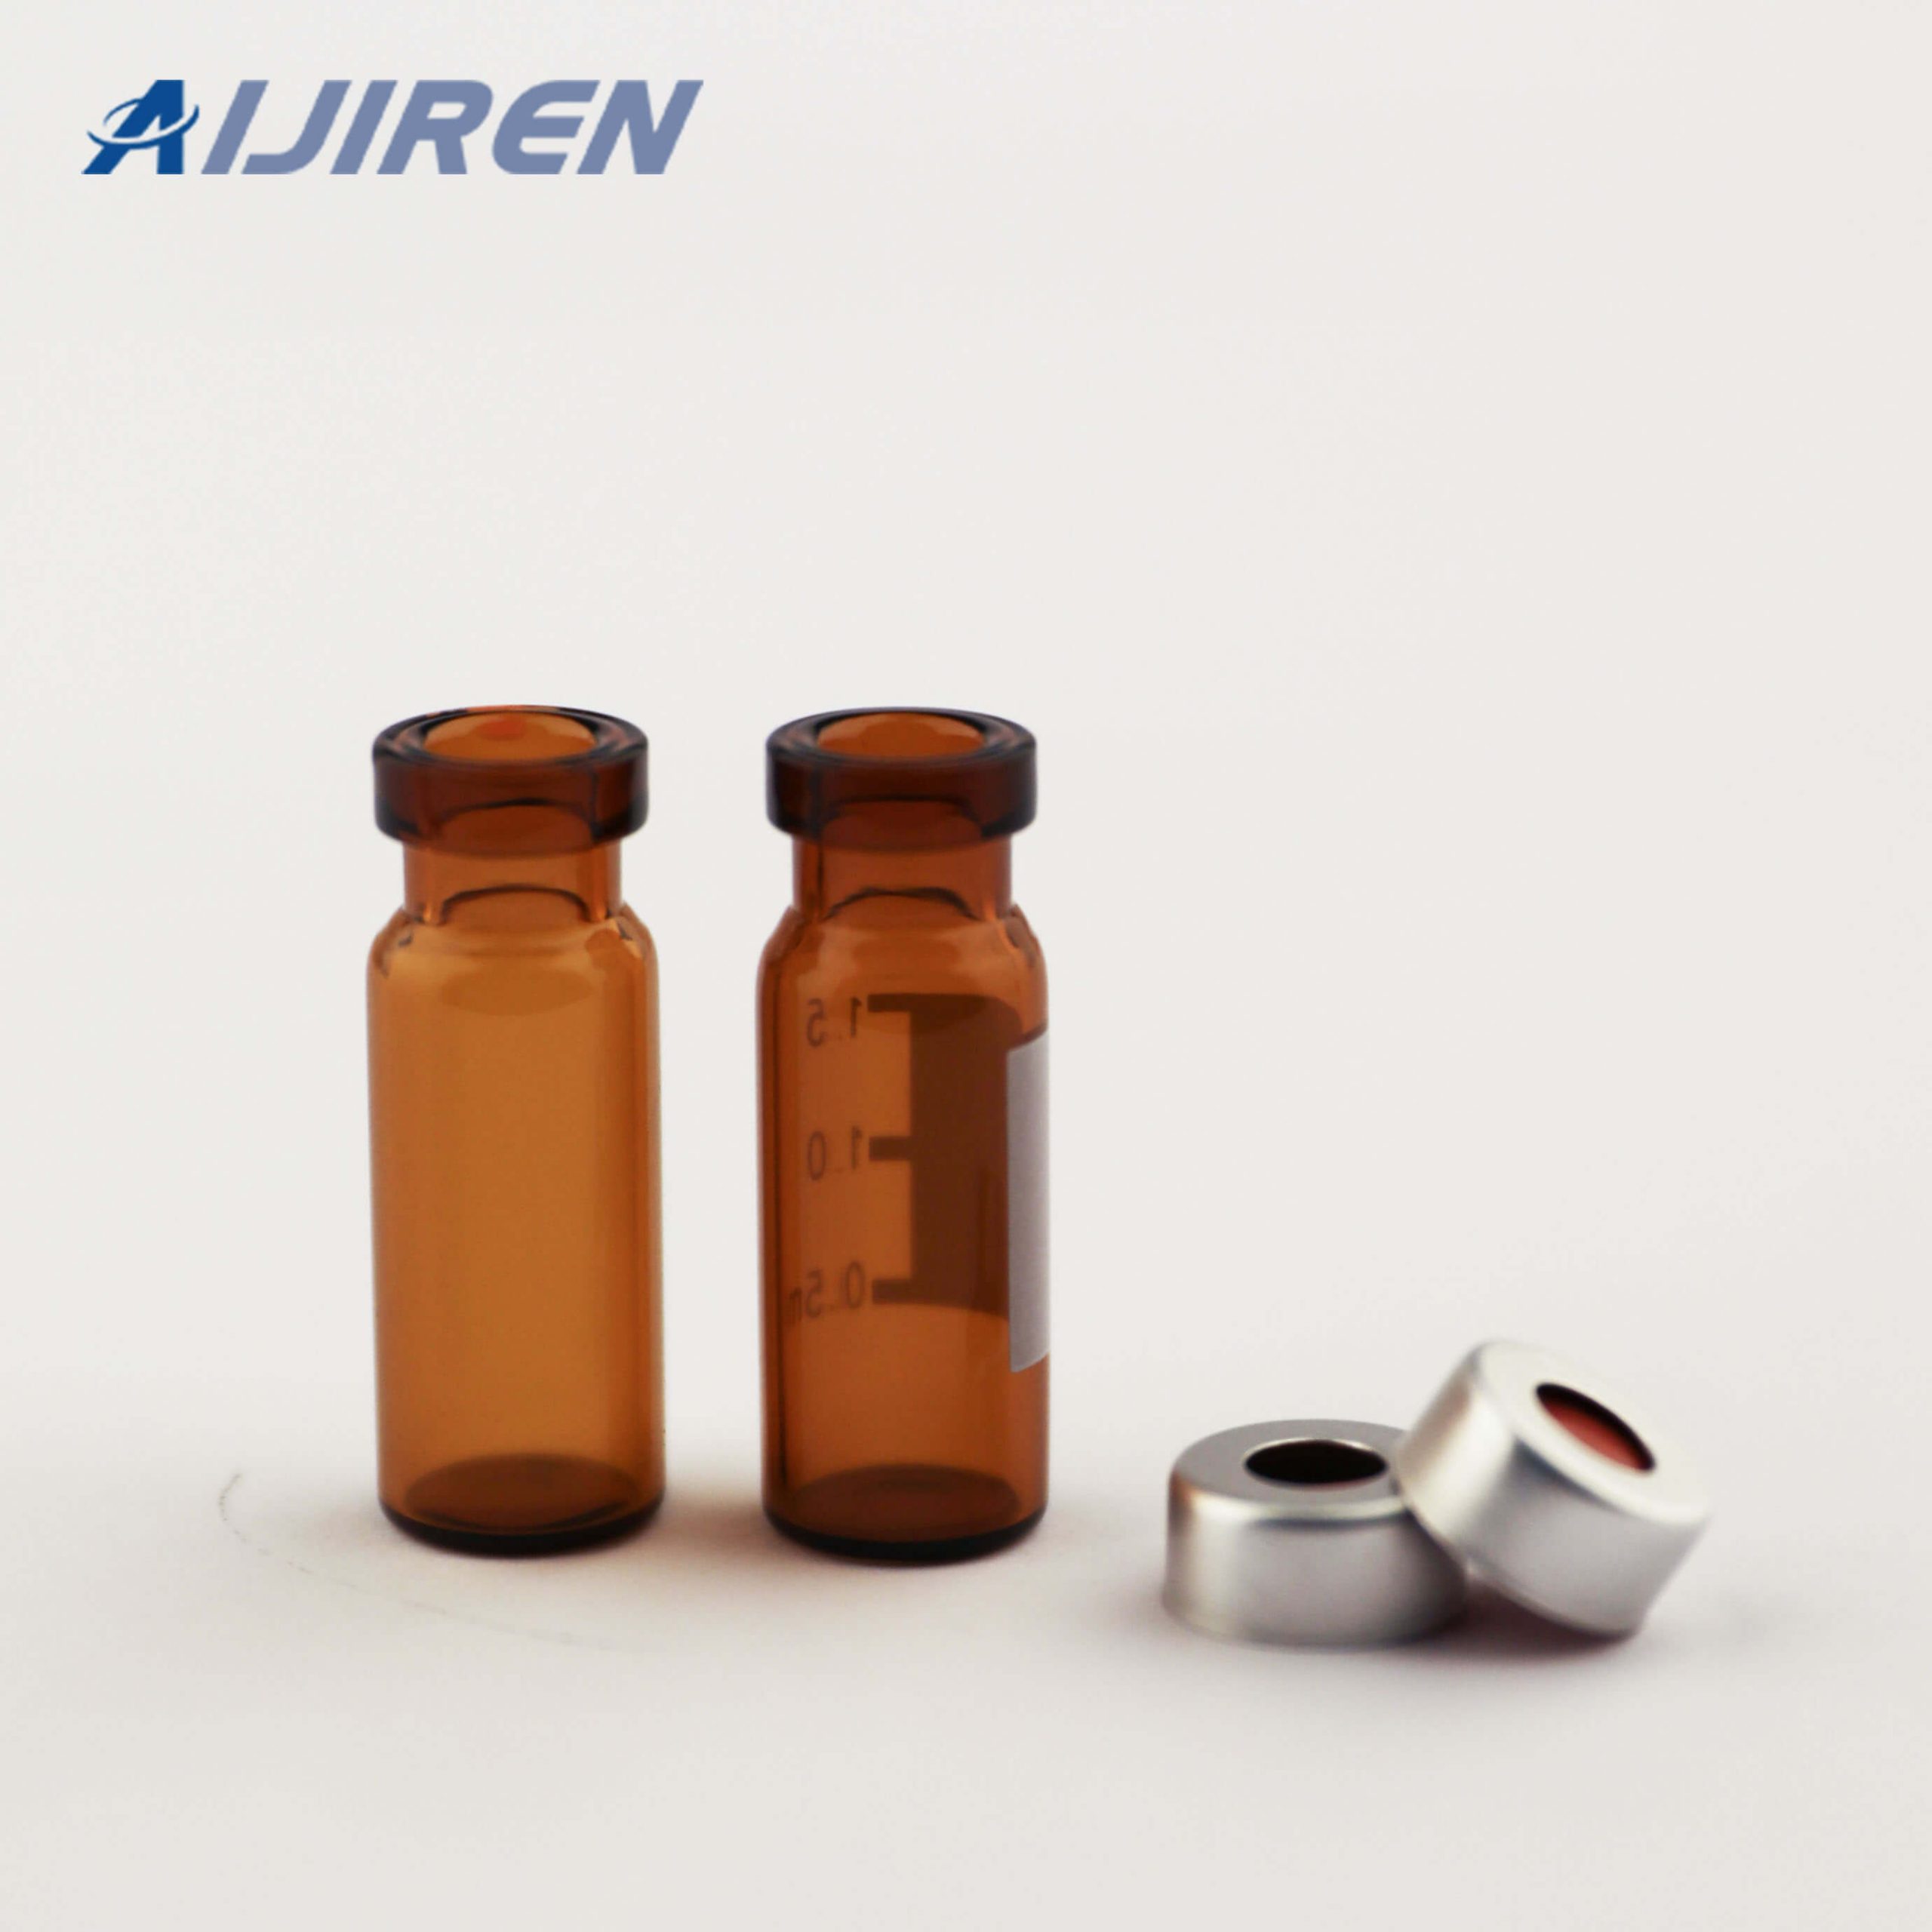 2ml Amber Glass Crimp Vials for WATERS